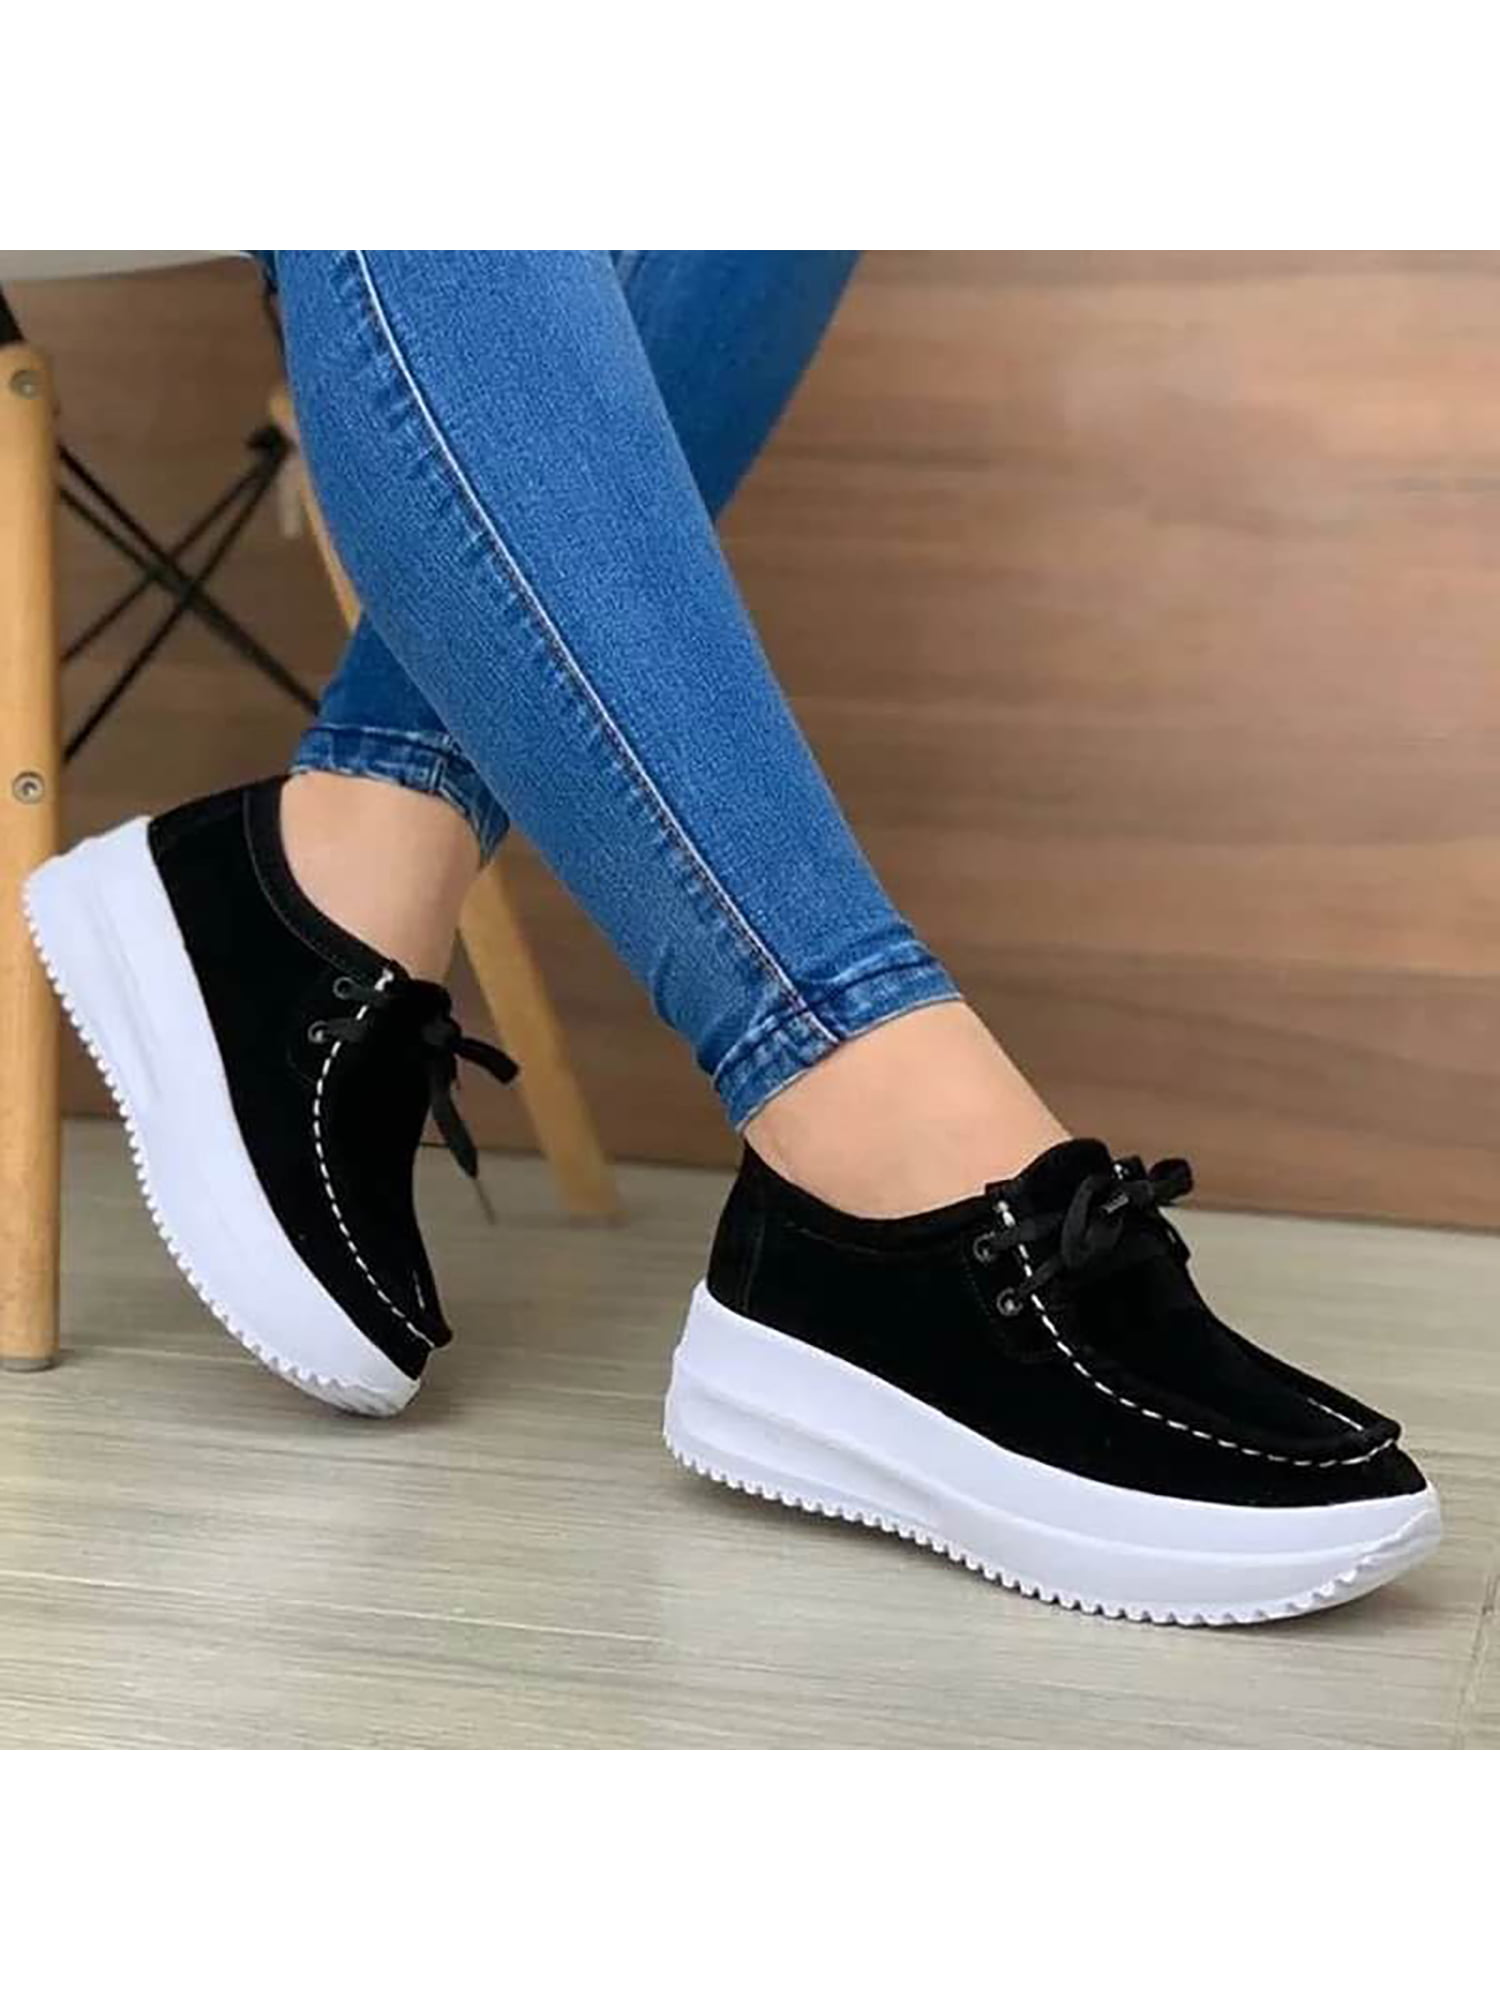 WOMENS LADIES FLAT DOUBLE PLATFORM WEDGE LACE UP PUNK GOTH CREEPERS SHOES SIZE